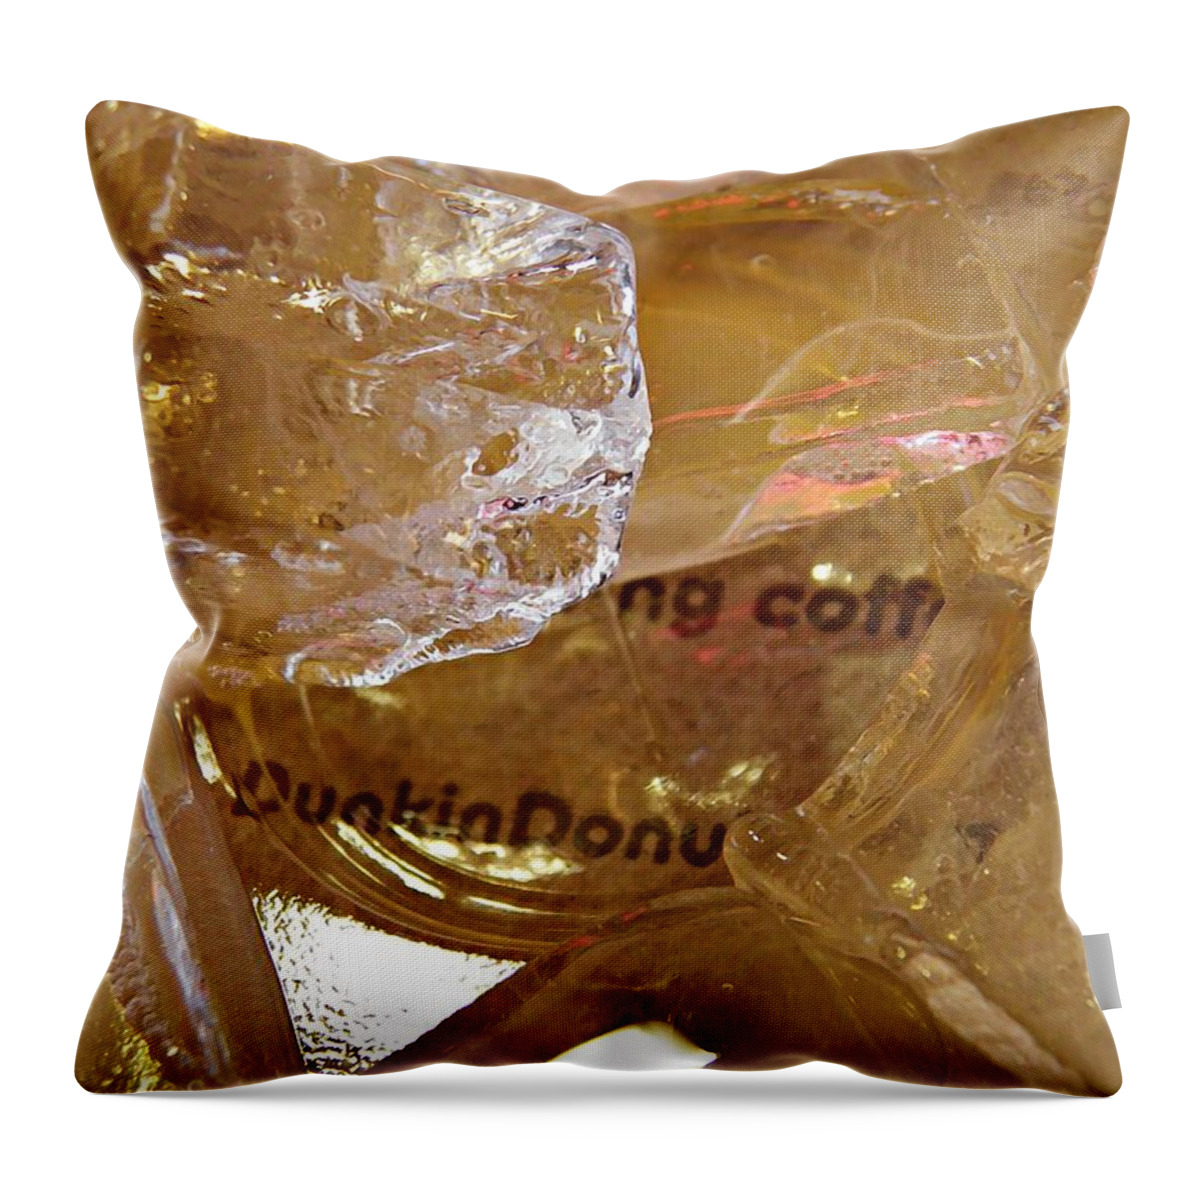 Dunkin Ice Coffee 36 Throw Pillow featuring the photograph Dunkin Ice Coffee 36 by Sarah Loft